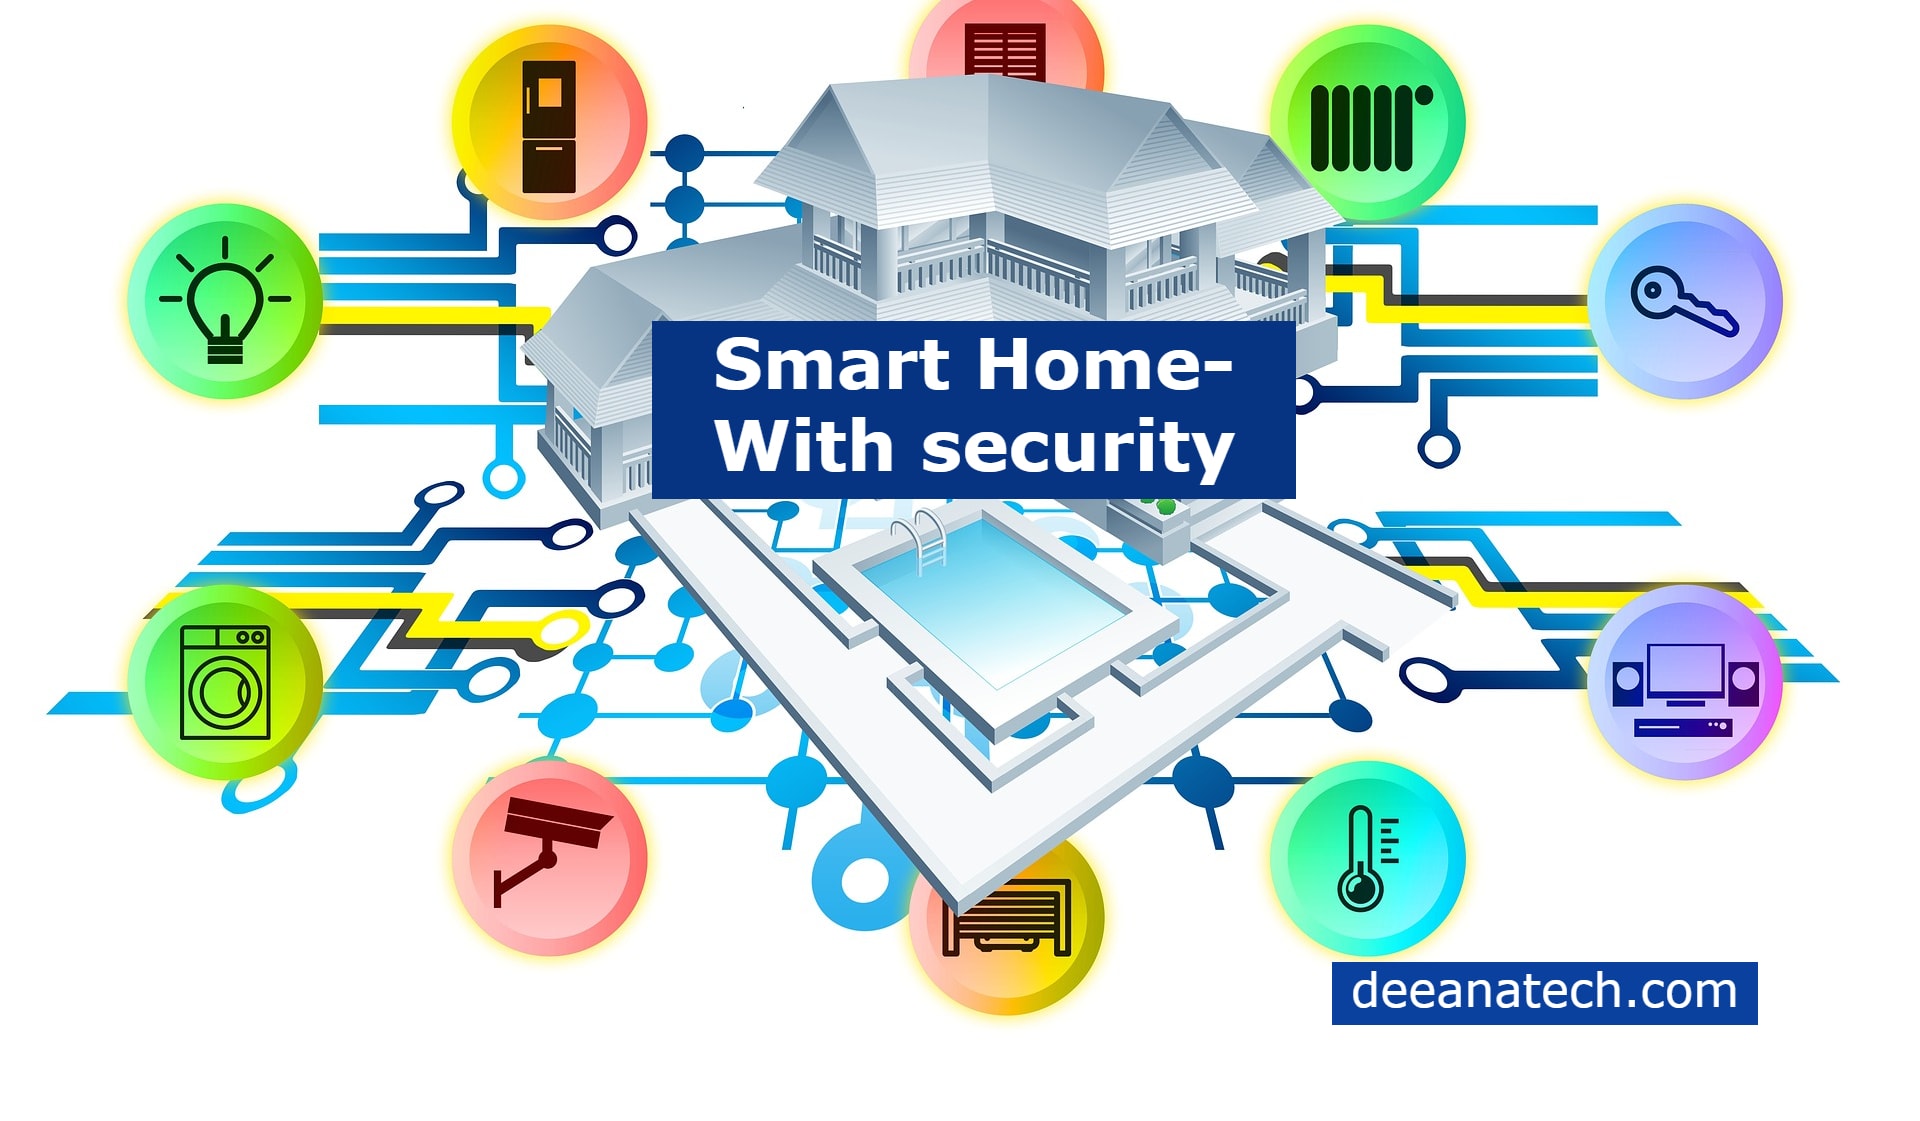 Home security systems- Know Types of Wireless Home security systems- DeeanaTech